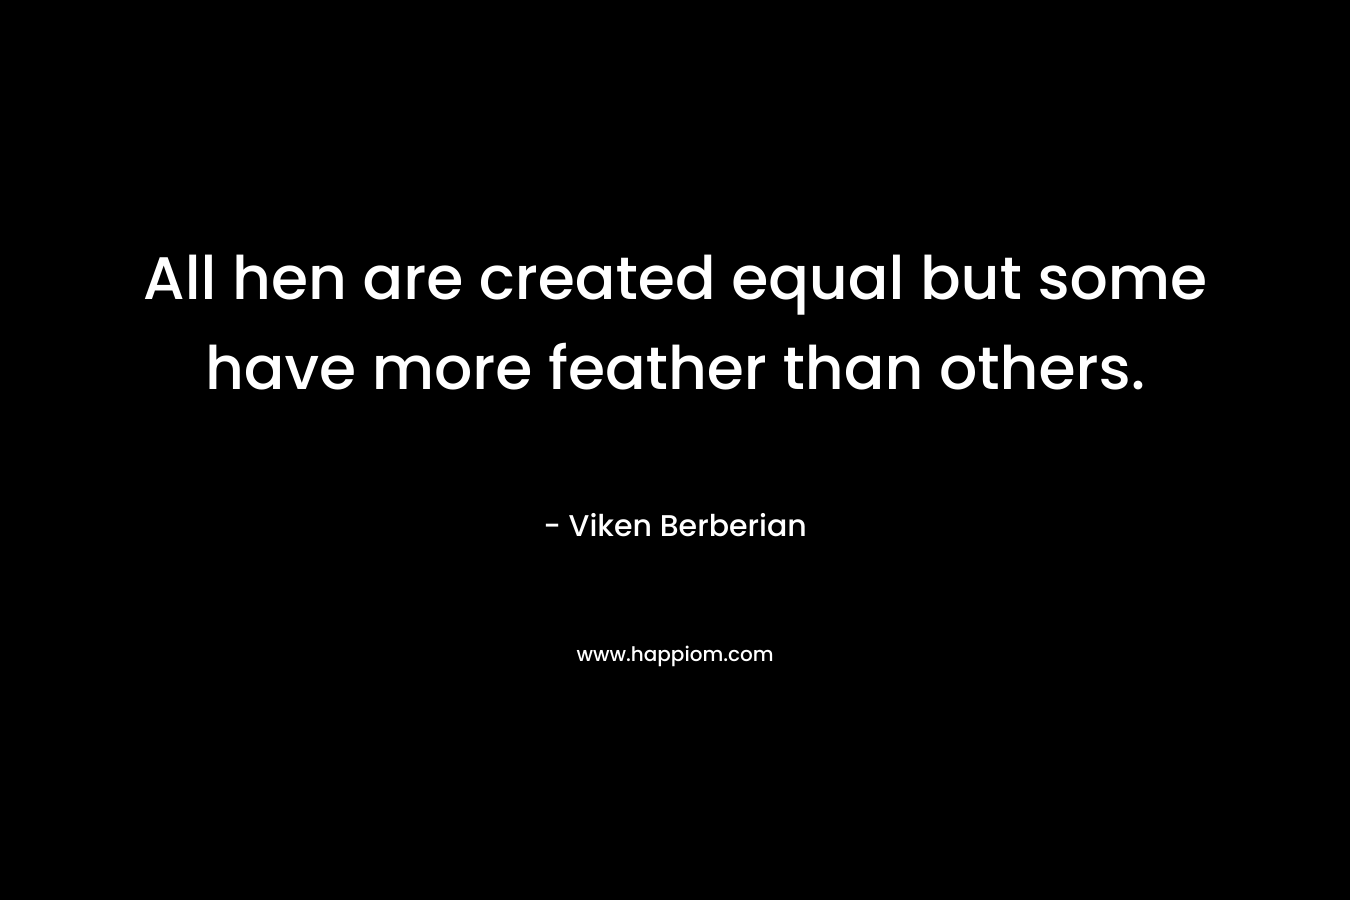 All hen are created equal but some have more feather than others. – Viken Berberian